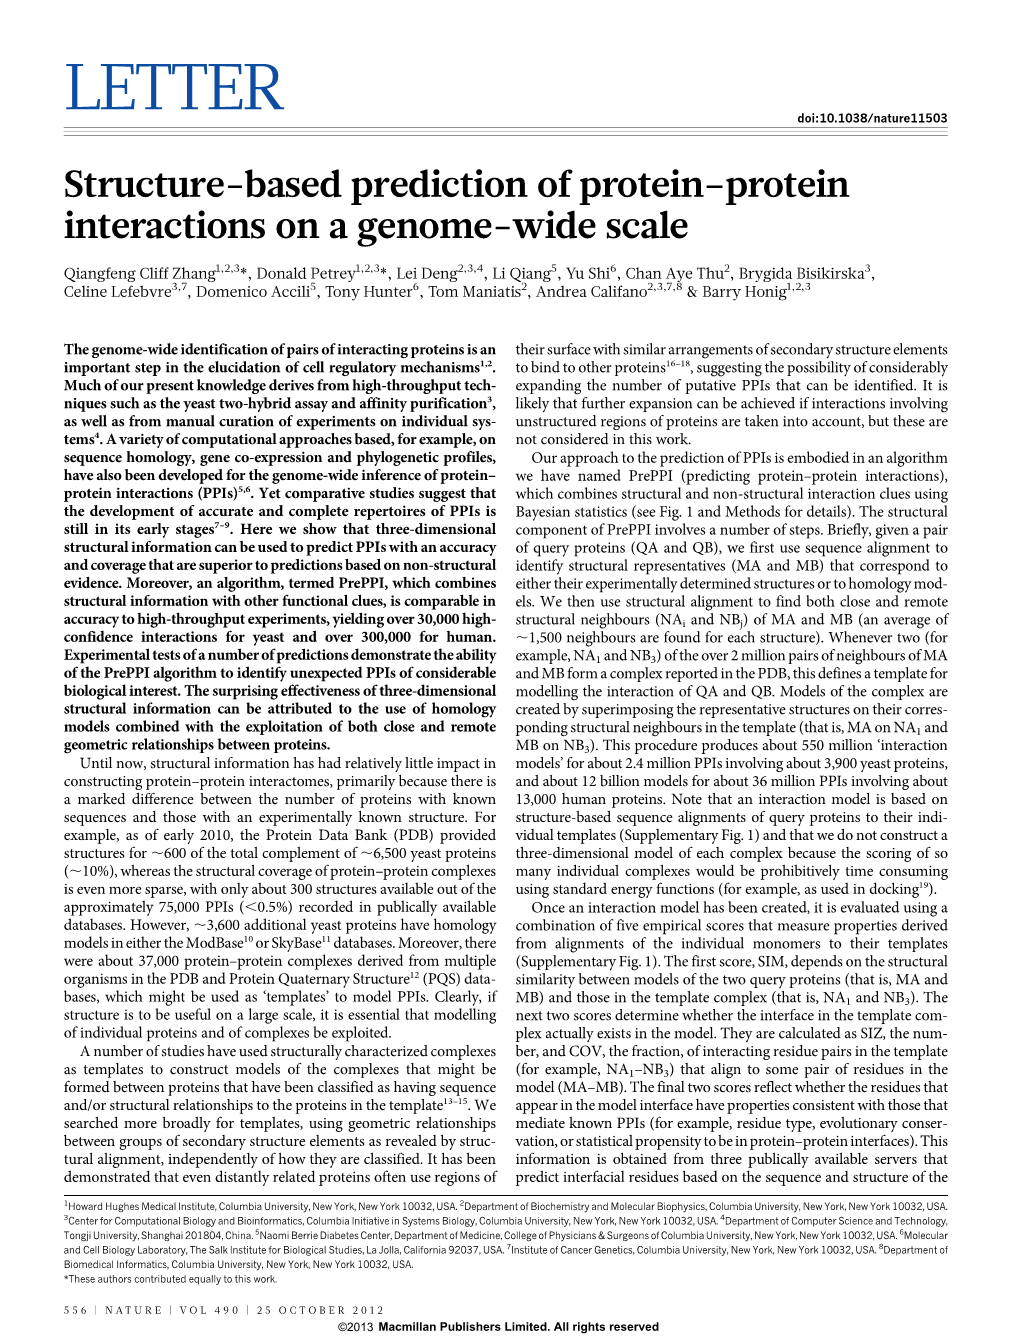 Structure-Based Prediction of Protein-Protein Interactions on A